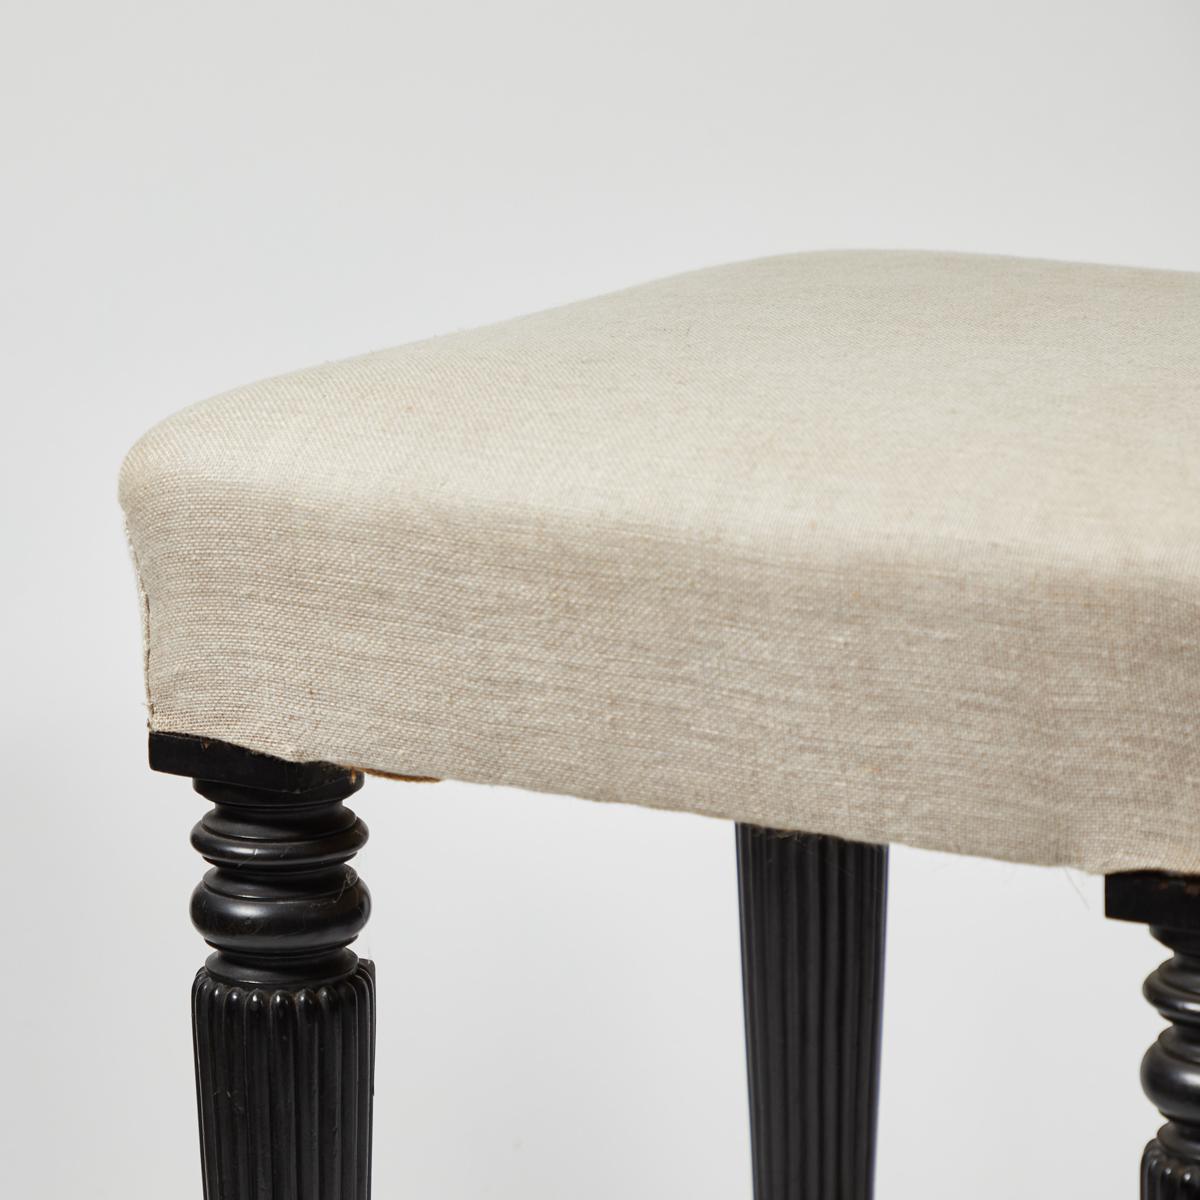 Late 19th-century English stool with fluted and turned ebonized wood legs, reupholstered in a beautiful flax-toned linen. Versatile and with charming proportioned, this stool adds a classic, understated touch to any space. 

England, circa